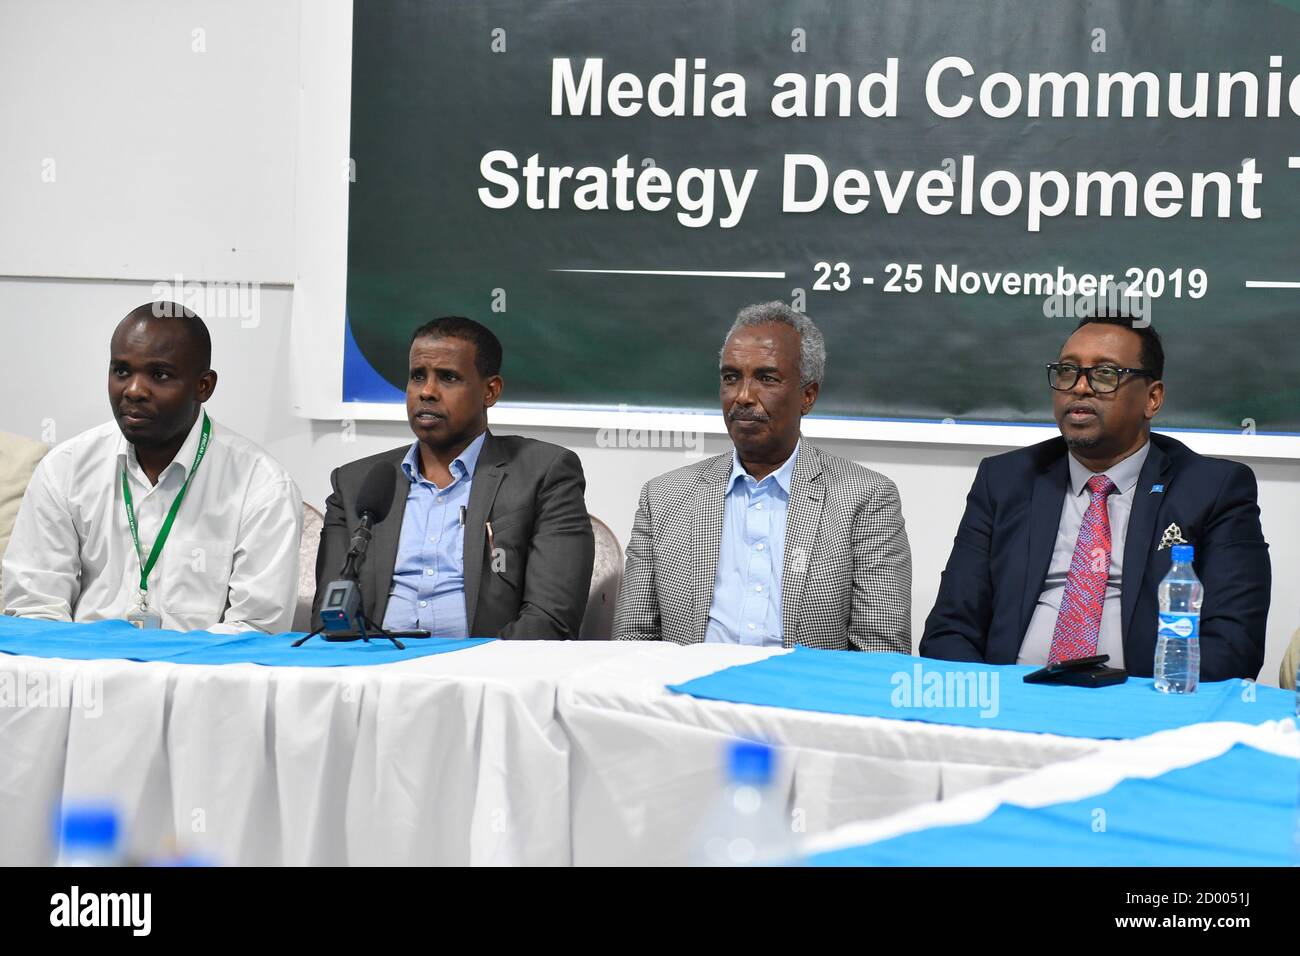 Senior officials of Somalia's Federal Ministry of Foreign Affairs and International Cooperation and Gaffel Nkolokosa (left), AMISOM Public Information Officer at a training on Media and Communication Strategy Development in Mogadishu on November 25 2019. The training was organized with the support of the African Union Mission in Somalia (AMISOM). Stock Photo